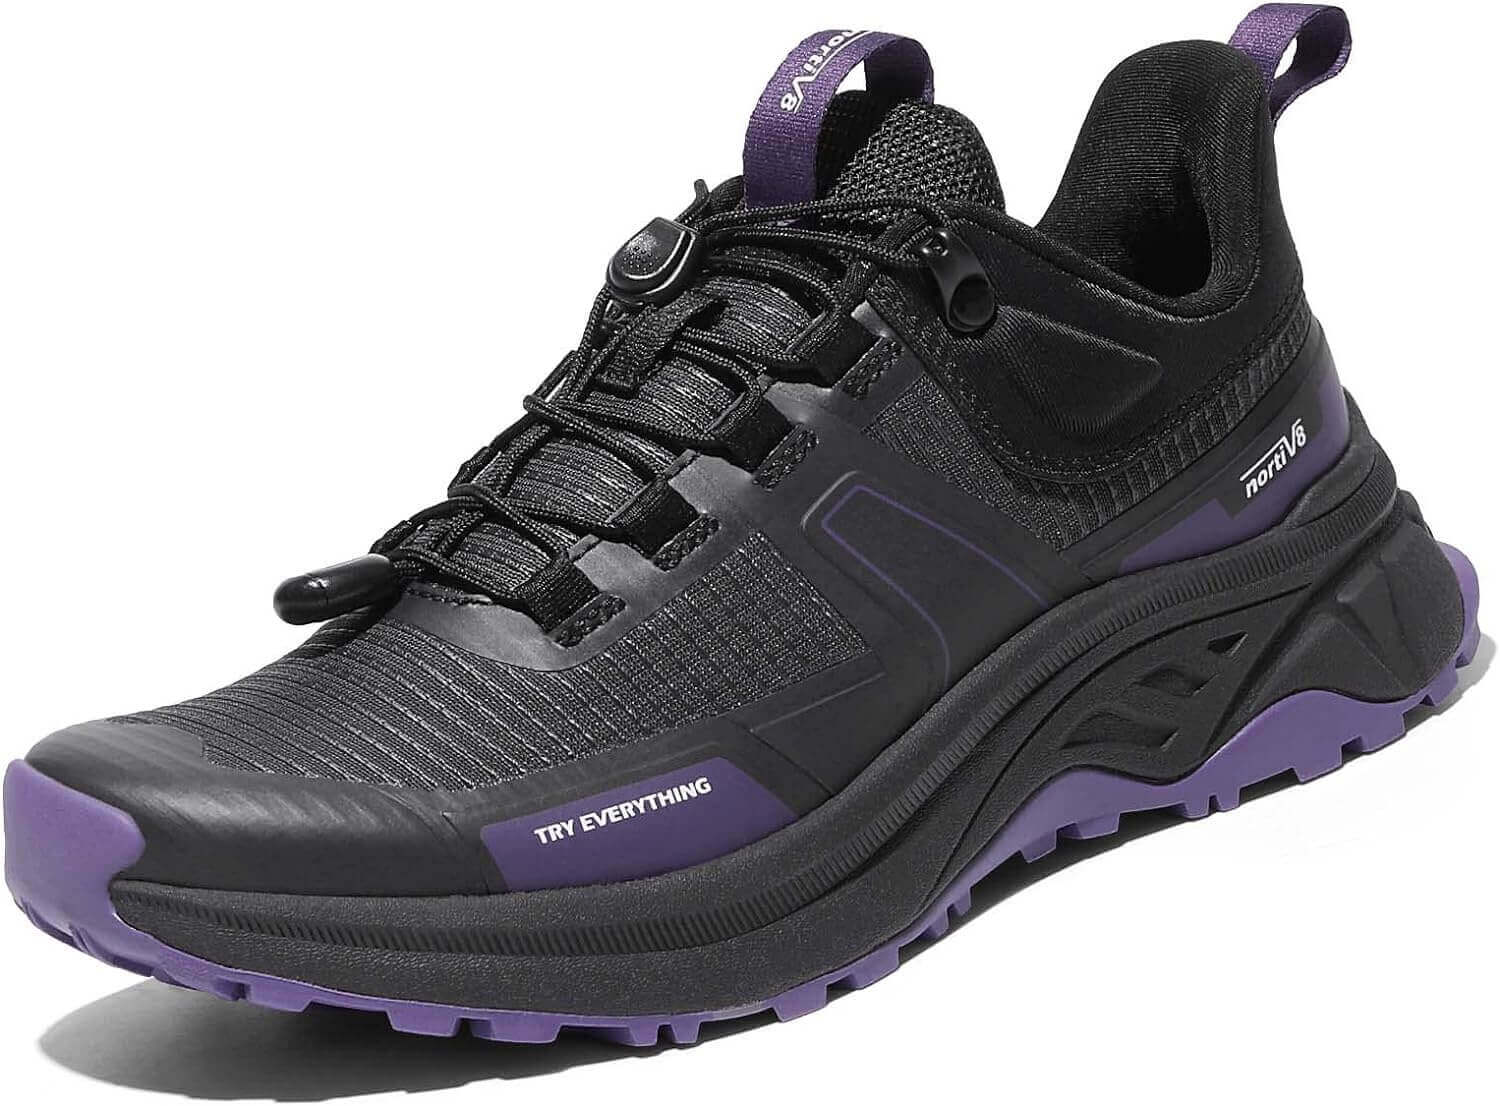 Shop The Latest >NORTIV 8 Women's Lightweight Hiking Shoes > *Only $67.19*> From The Top Brand > *NORTIV 8l* > Shop Now and Get Free Shipping On Orders Over $45.00 >*Shop Earth Foot*